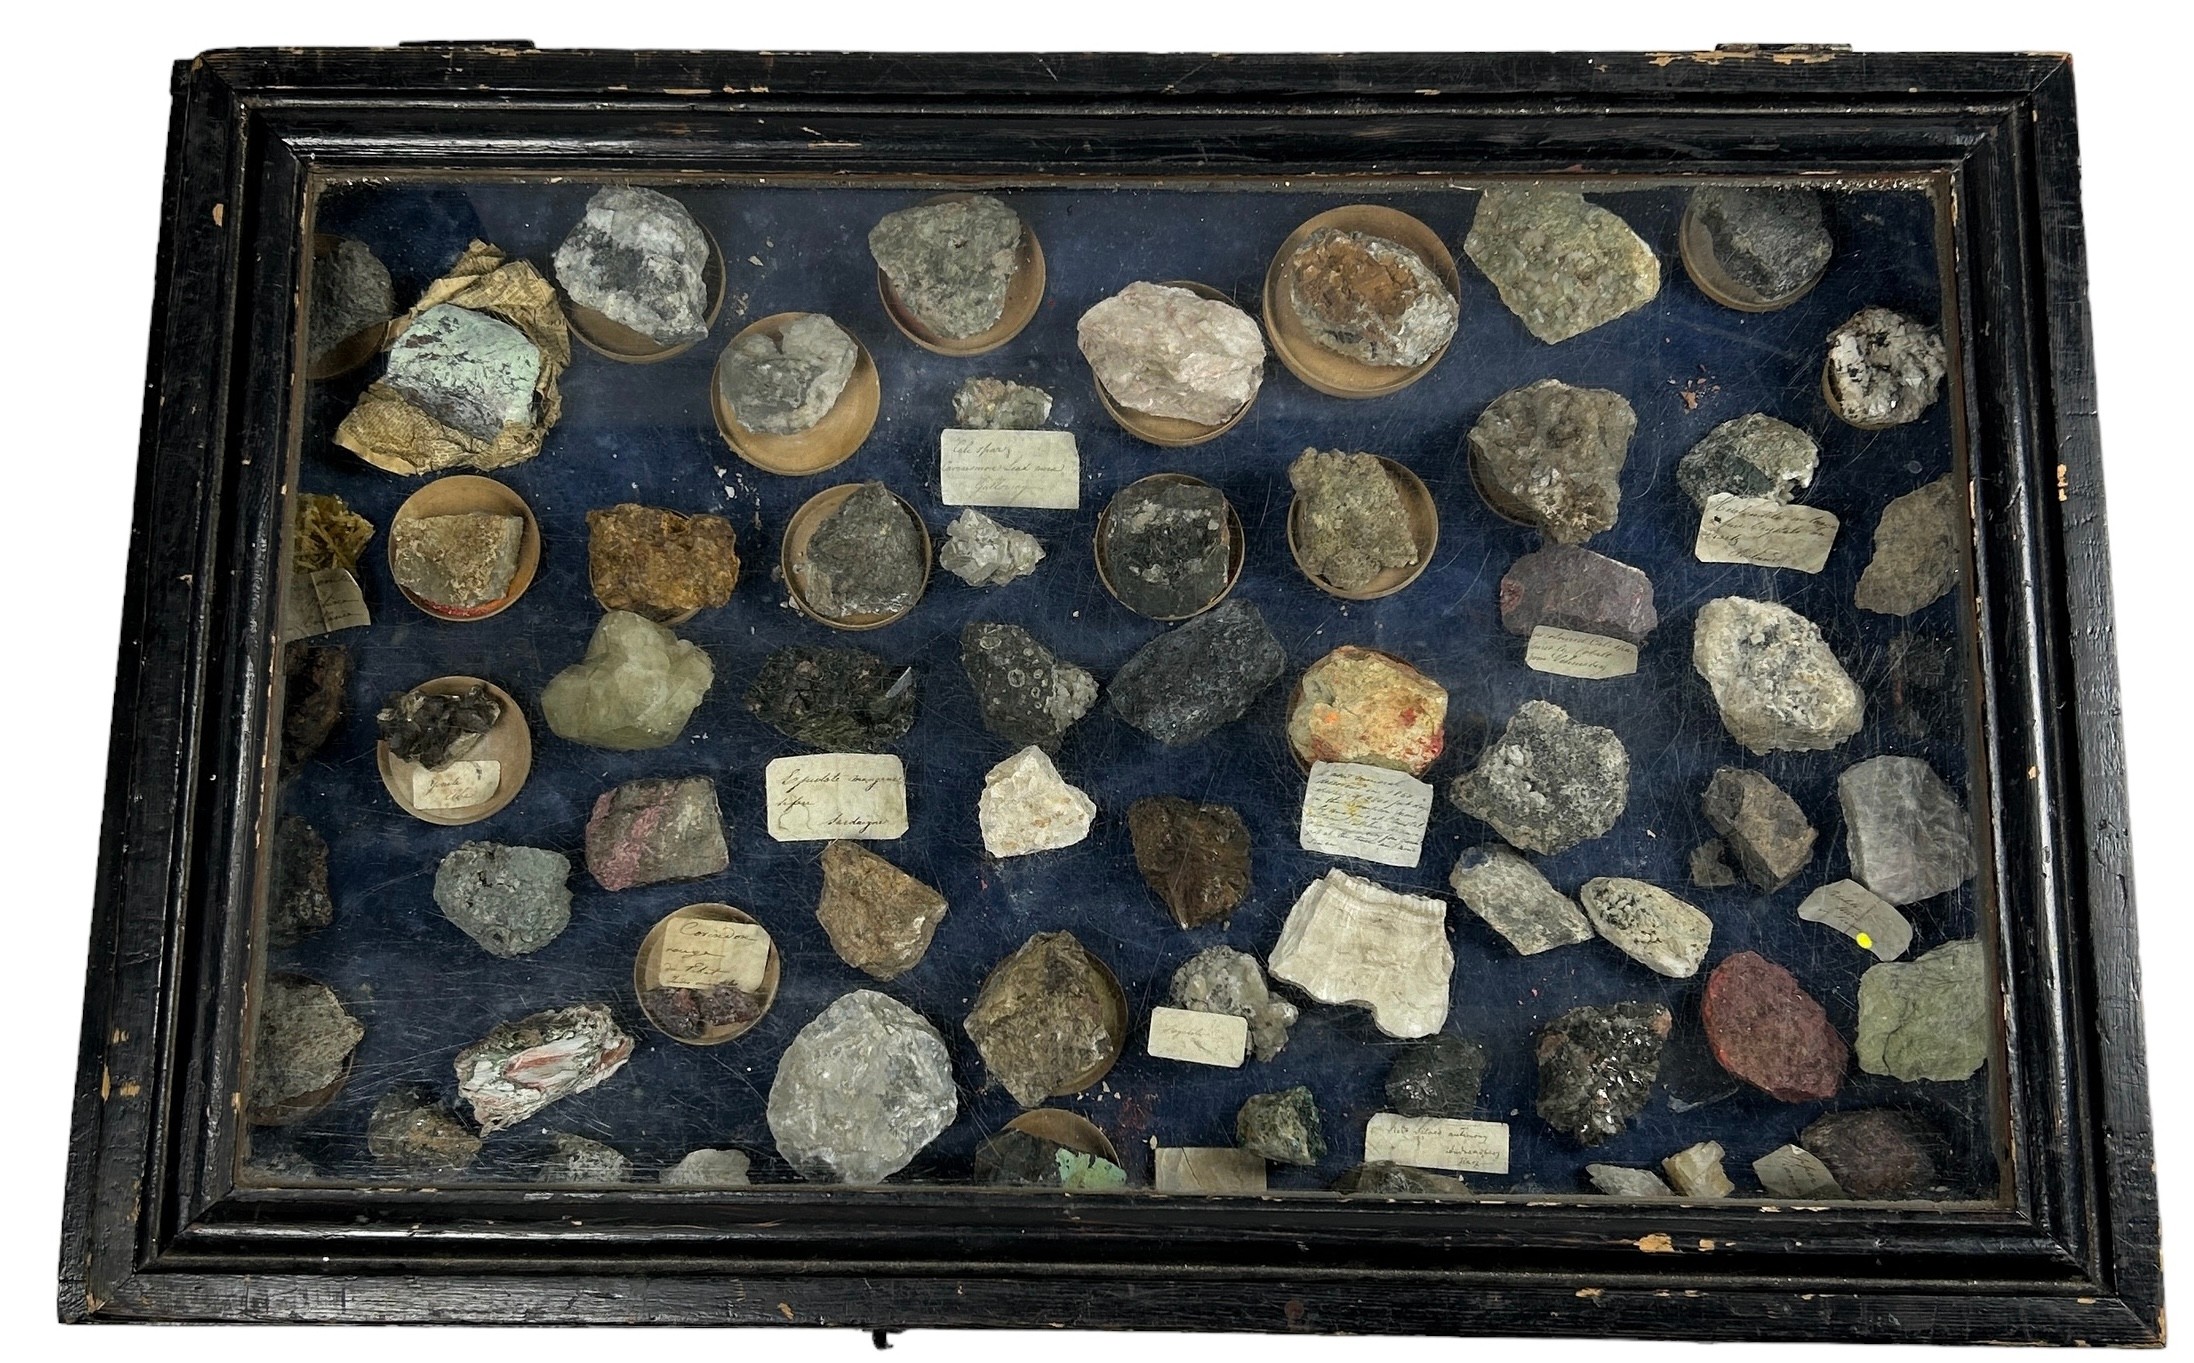 A RARE CABINET COLLECTION OF MINERALS CIRCA 1810-1860, including labels for some very important